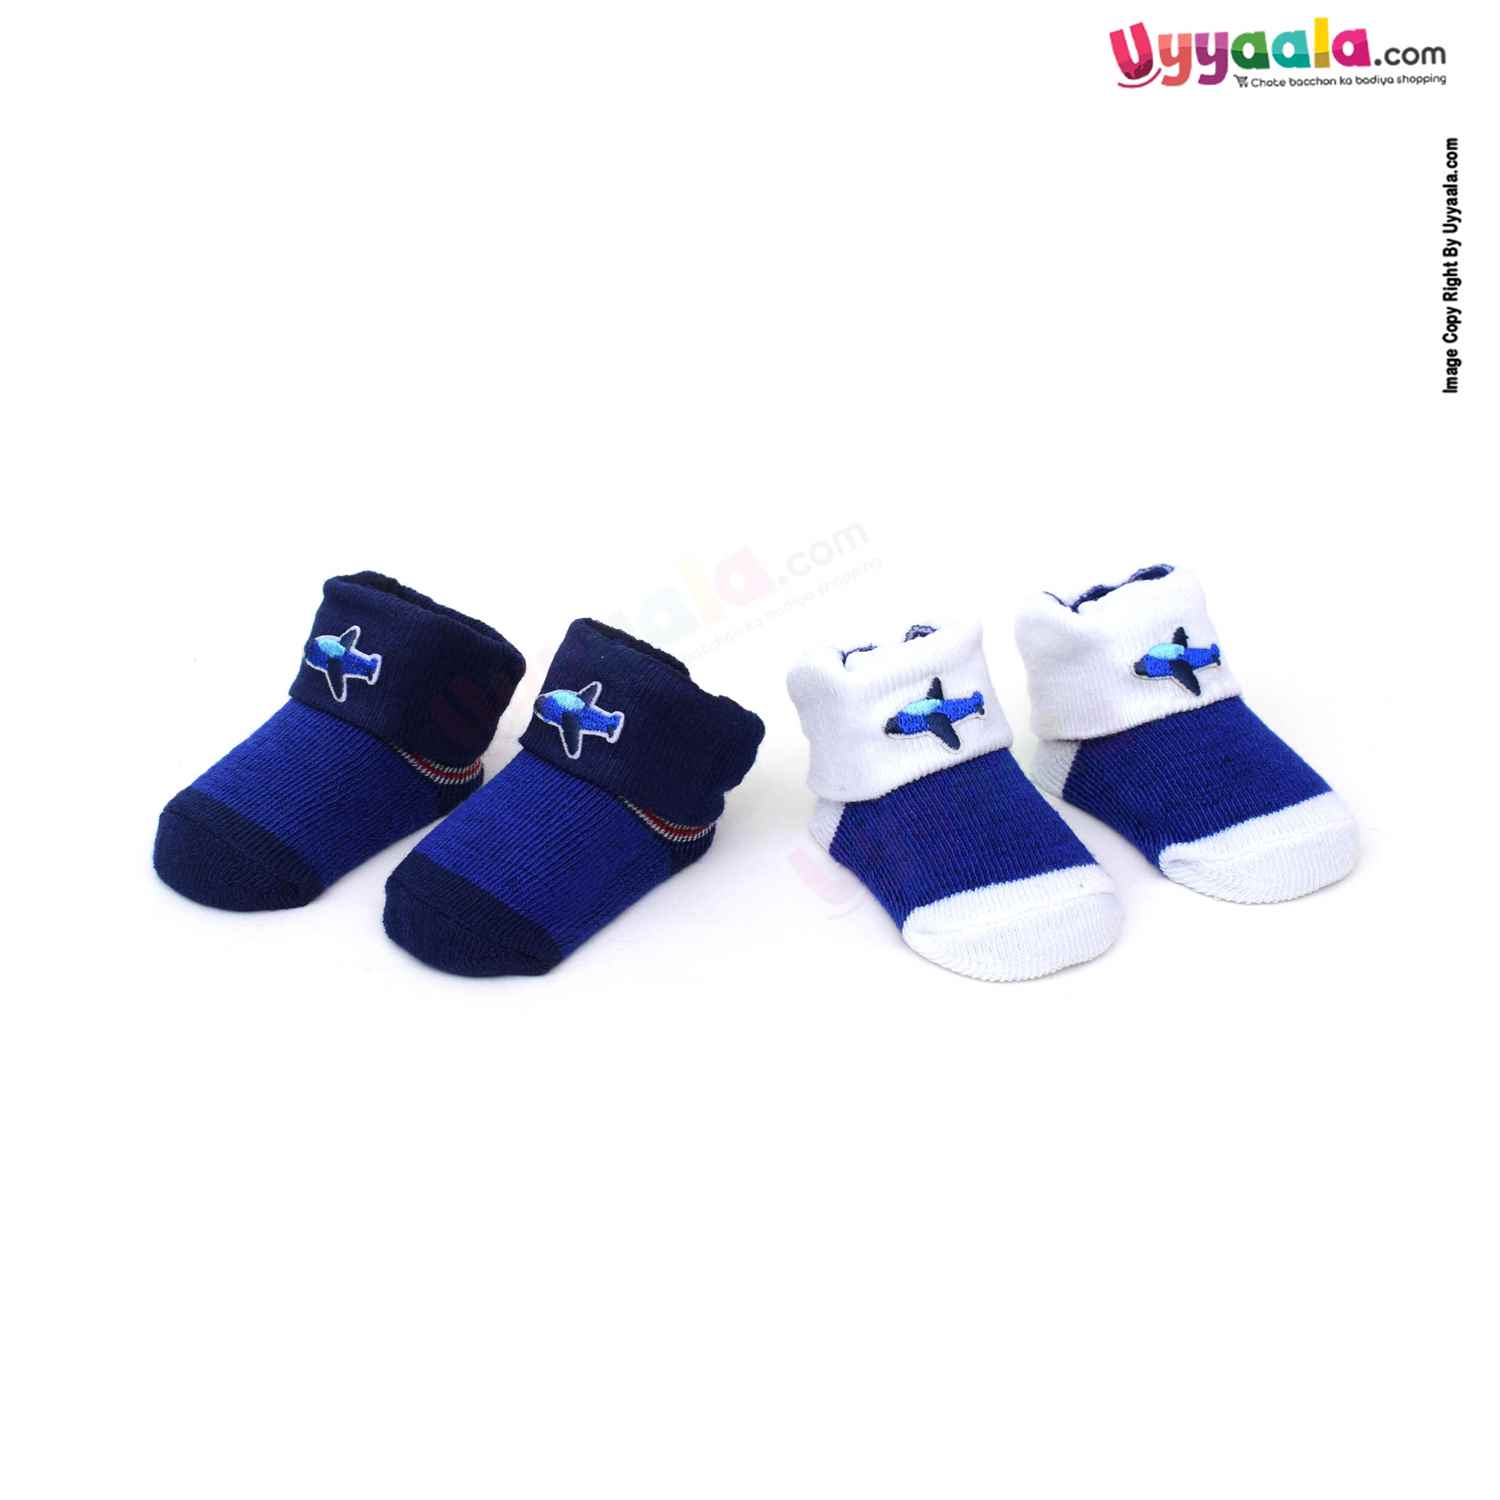 JUNIORS Fashion Socks Aeroplane Character for Babies Pack of 2 , 0-12m Age - Blue & White